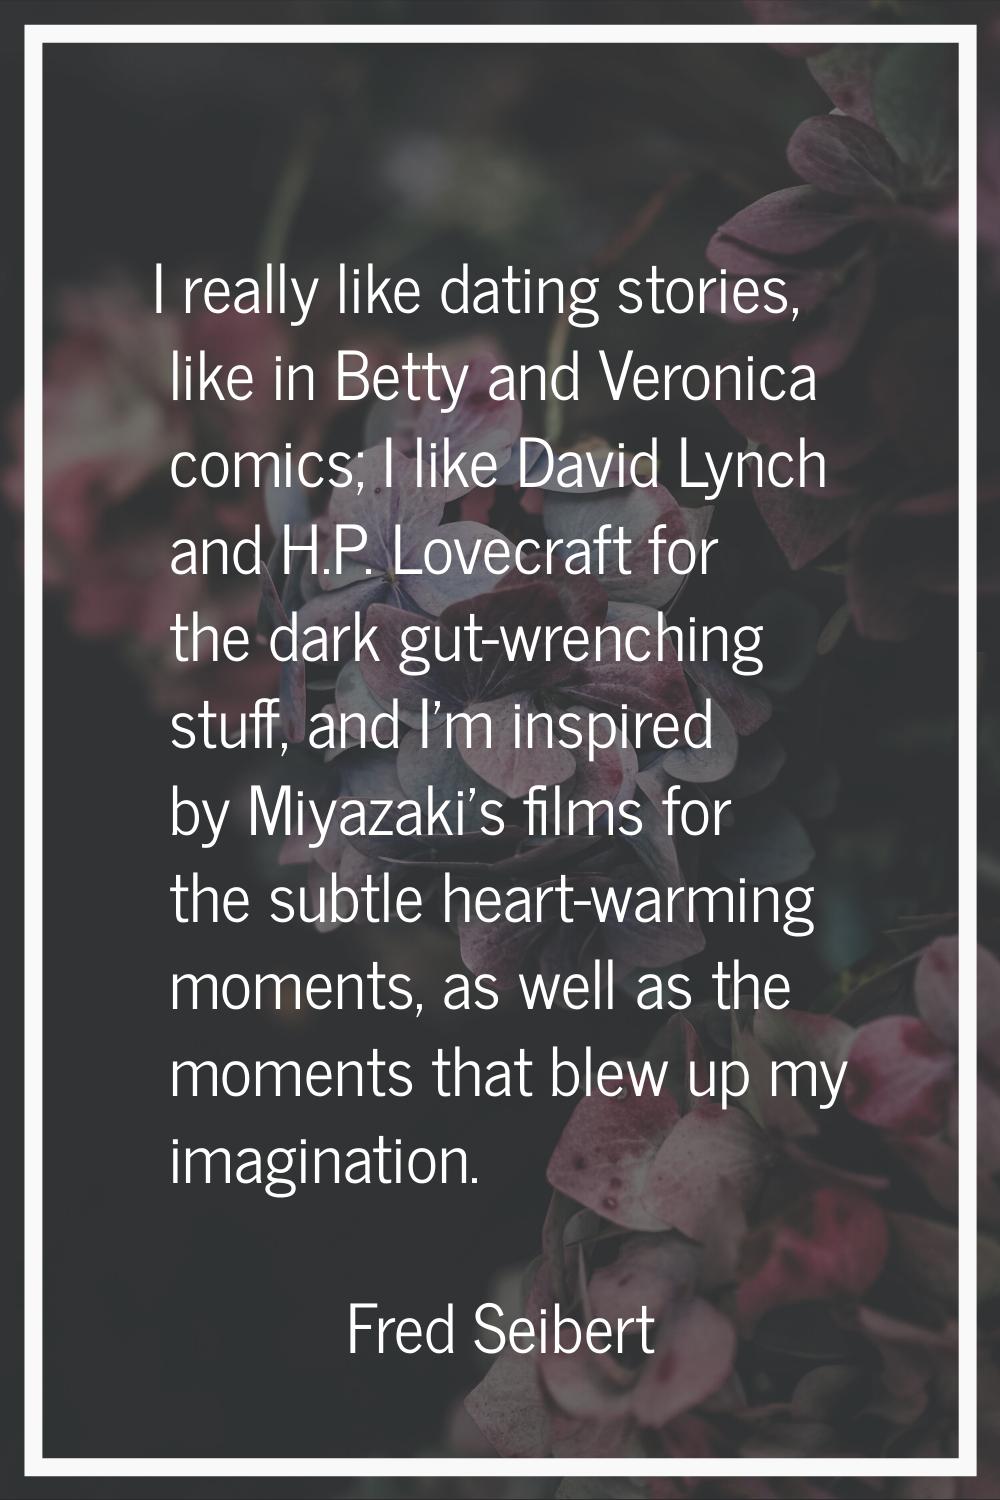 I really like dating stories, like in Betty and Veronica comics; I like David Lynch and H.P. Lovecr